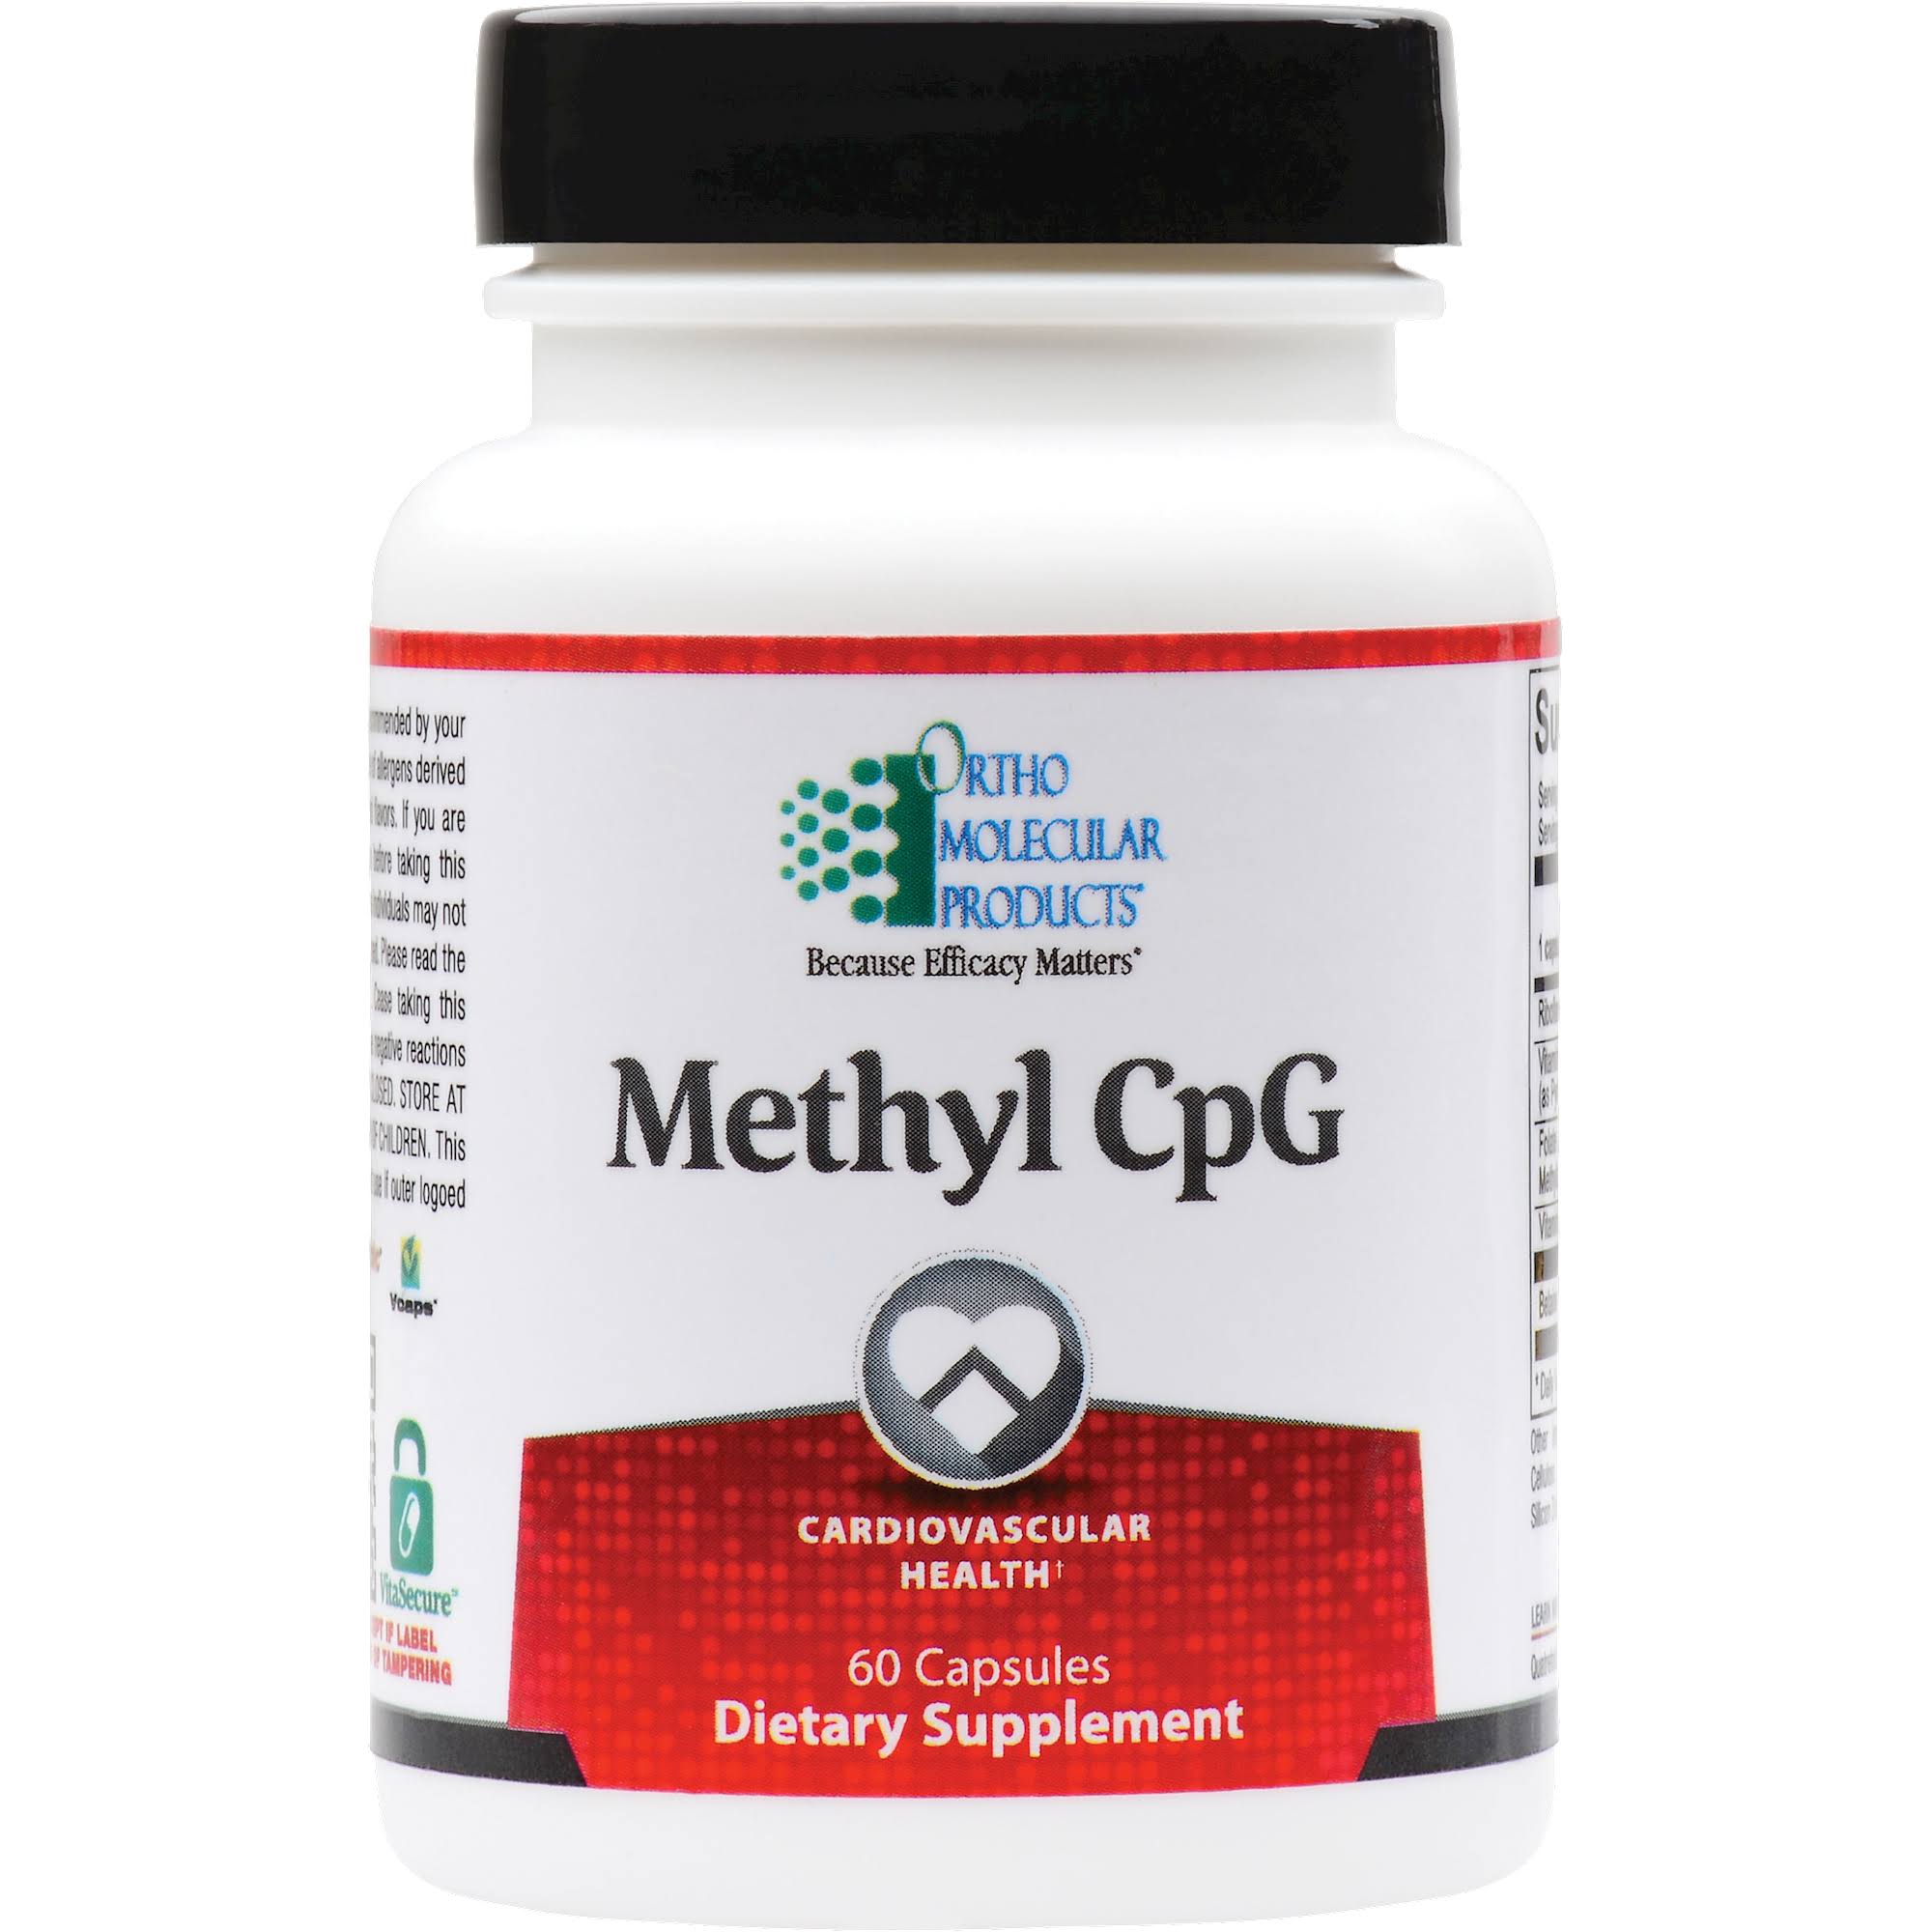 Ortho Molecular Products Methyl CPG Supplement - 60 Capsules